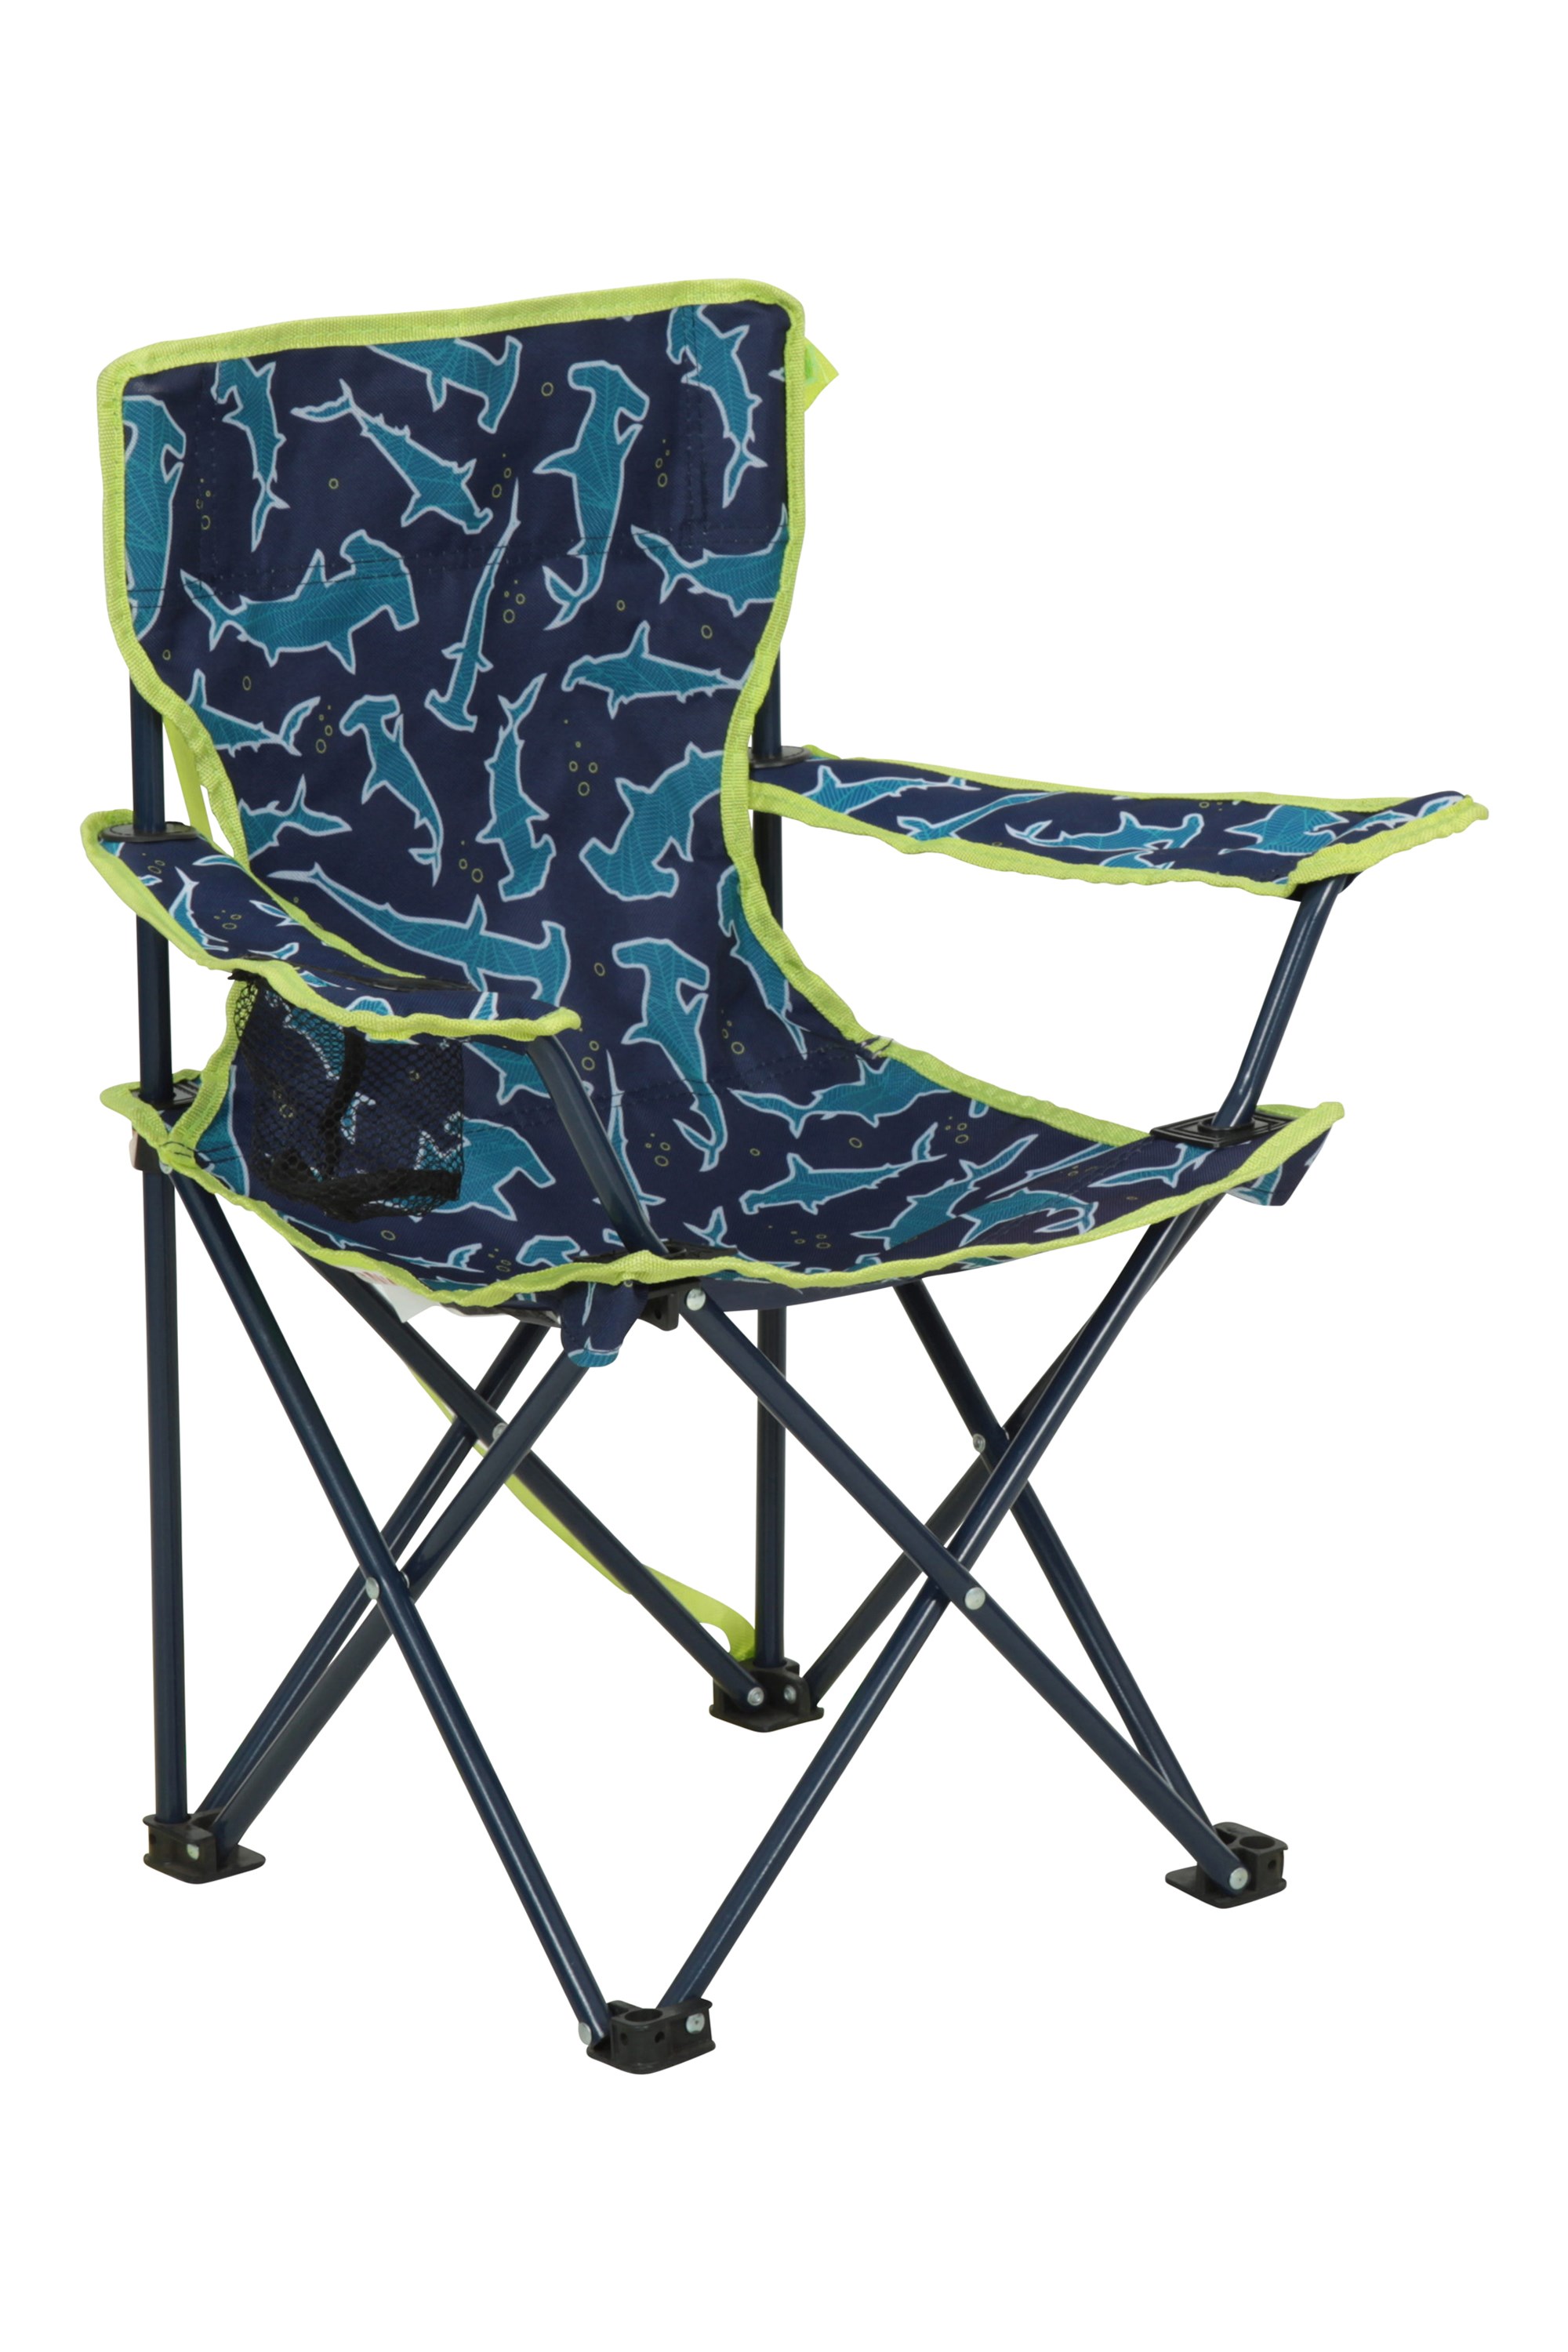 Mountain Warehouse Patterned Folding Chair with Arms & Cup Holder One Size 